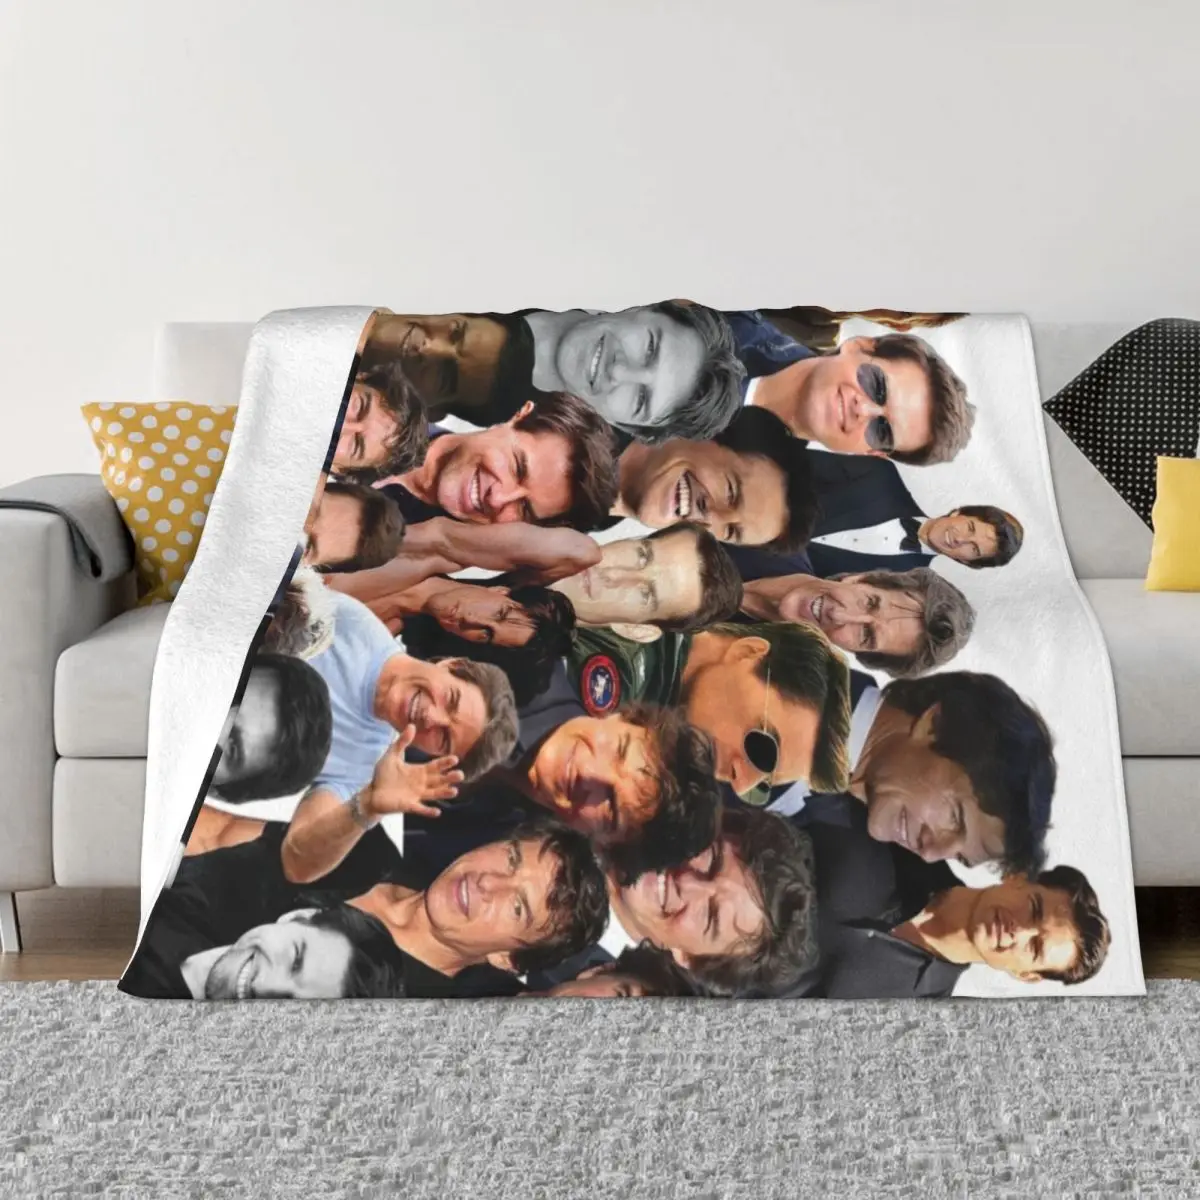 

tom cruise photo collage Throw Blanket Soft Plaid Decorative Bed Blankets